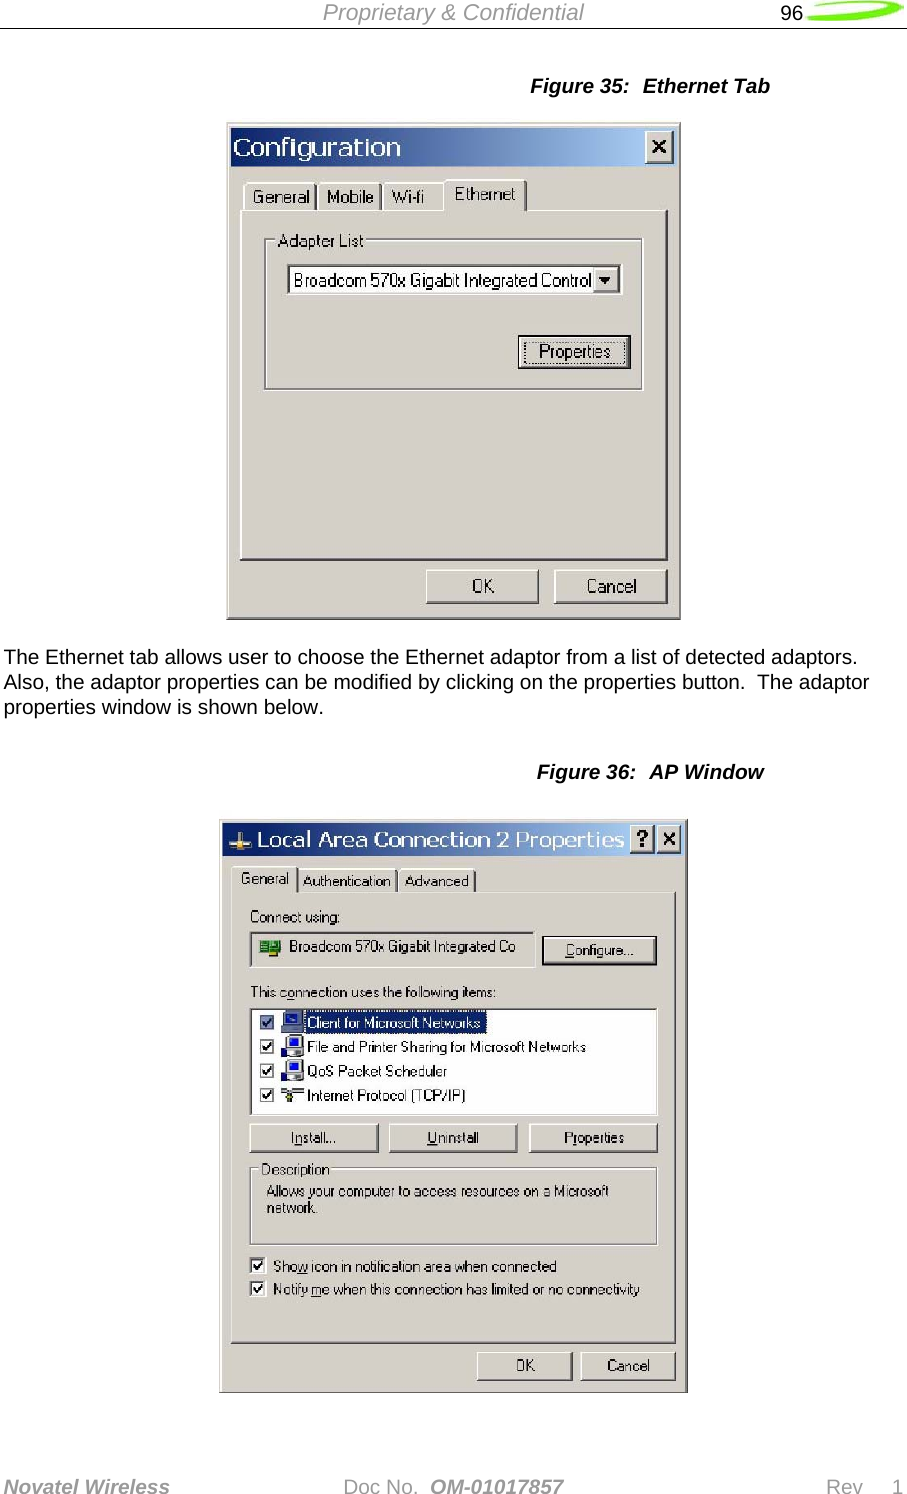  Proprietary &amp; Confidential   96   Novatel Wireless   Doc No.  OM-01017857                              Rev     1  Figure 35:  Ethernet Tab    The Ethernet tab allows user to choose the Ethernet adaptor from a list of detected adaptors.  Also, the adaptor properties can be modified by clicking on the properties button.  The adaptor properties window is shown below.  Figure 36:  AP Window  